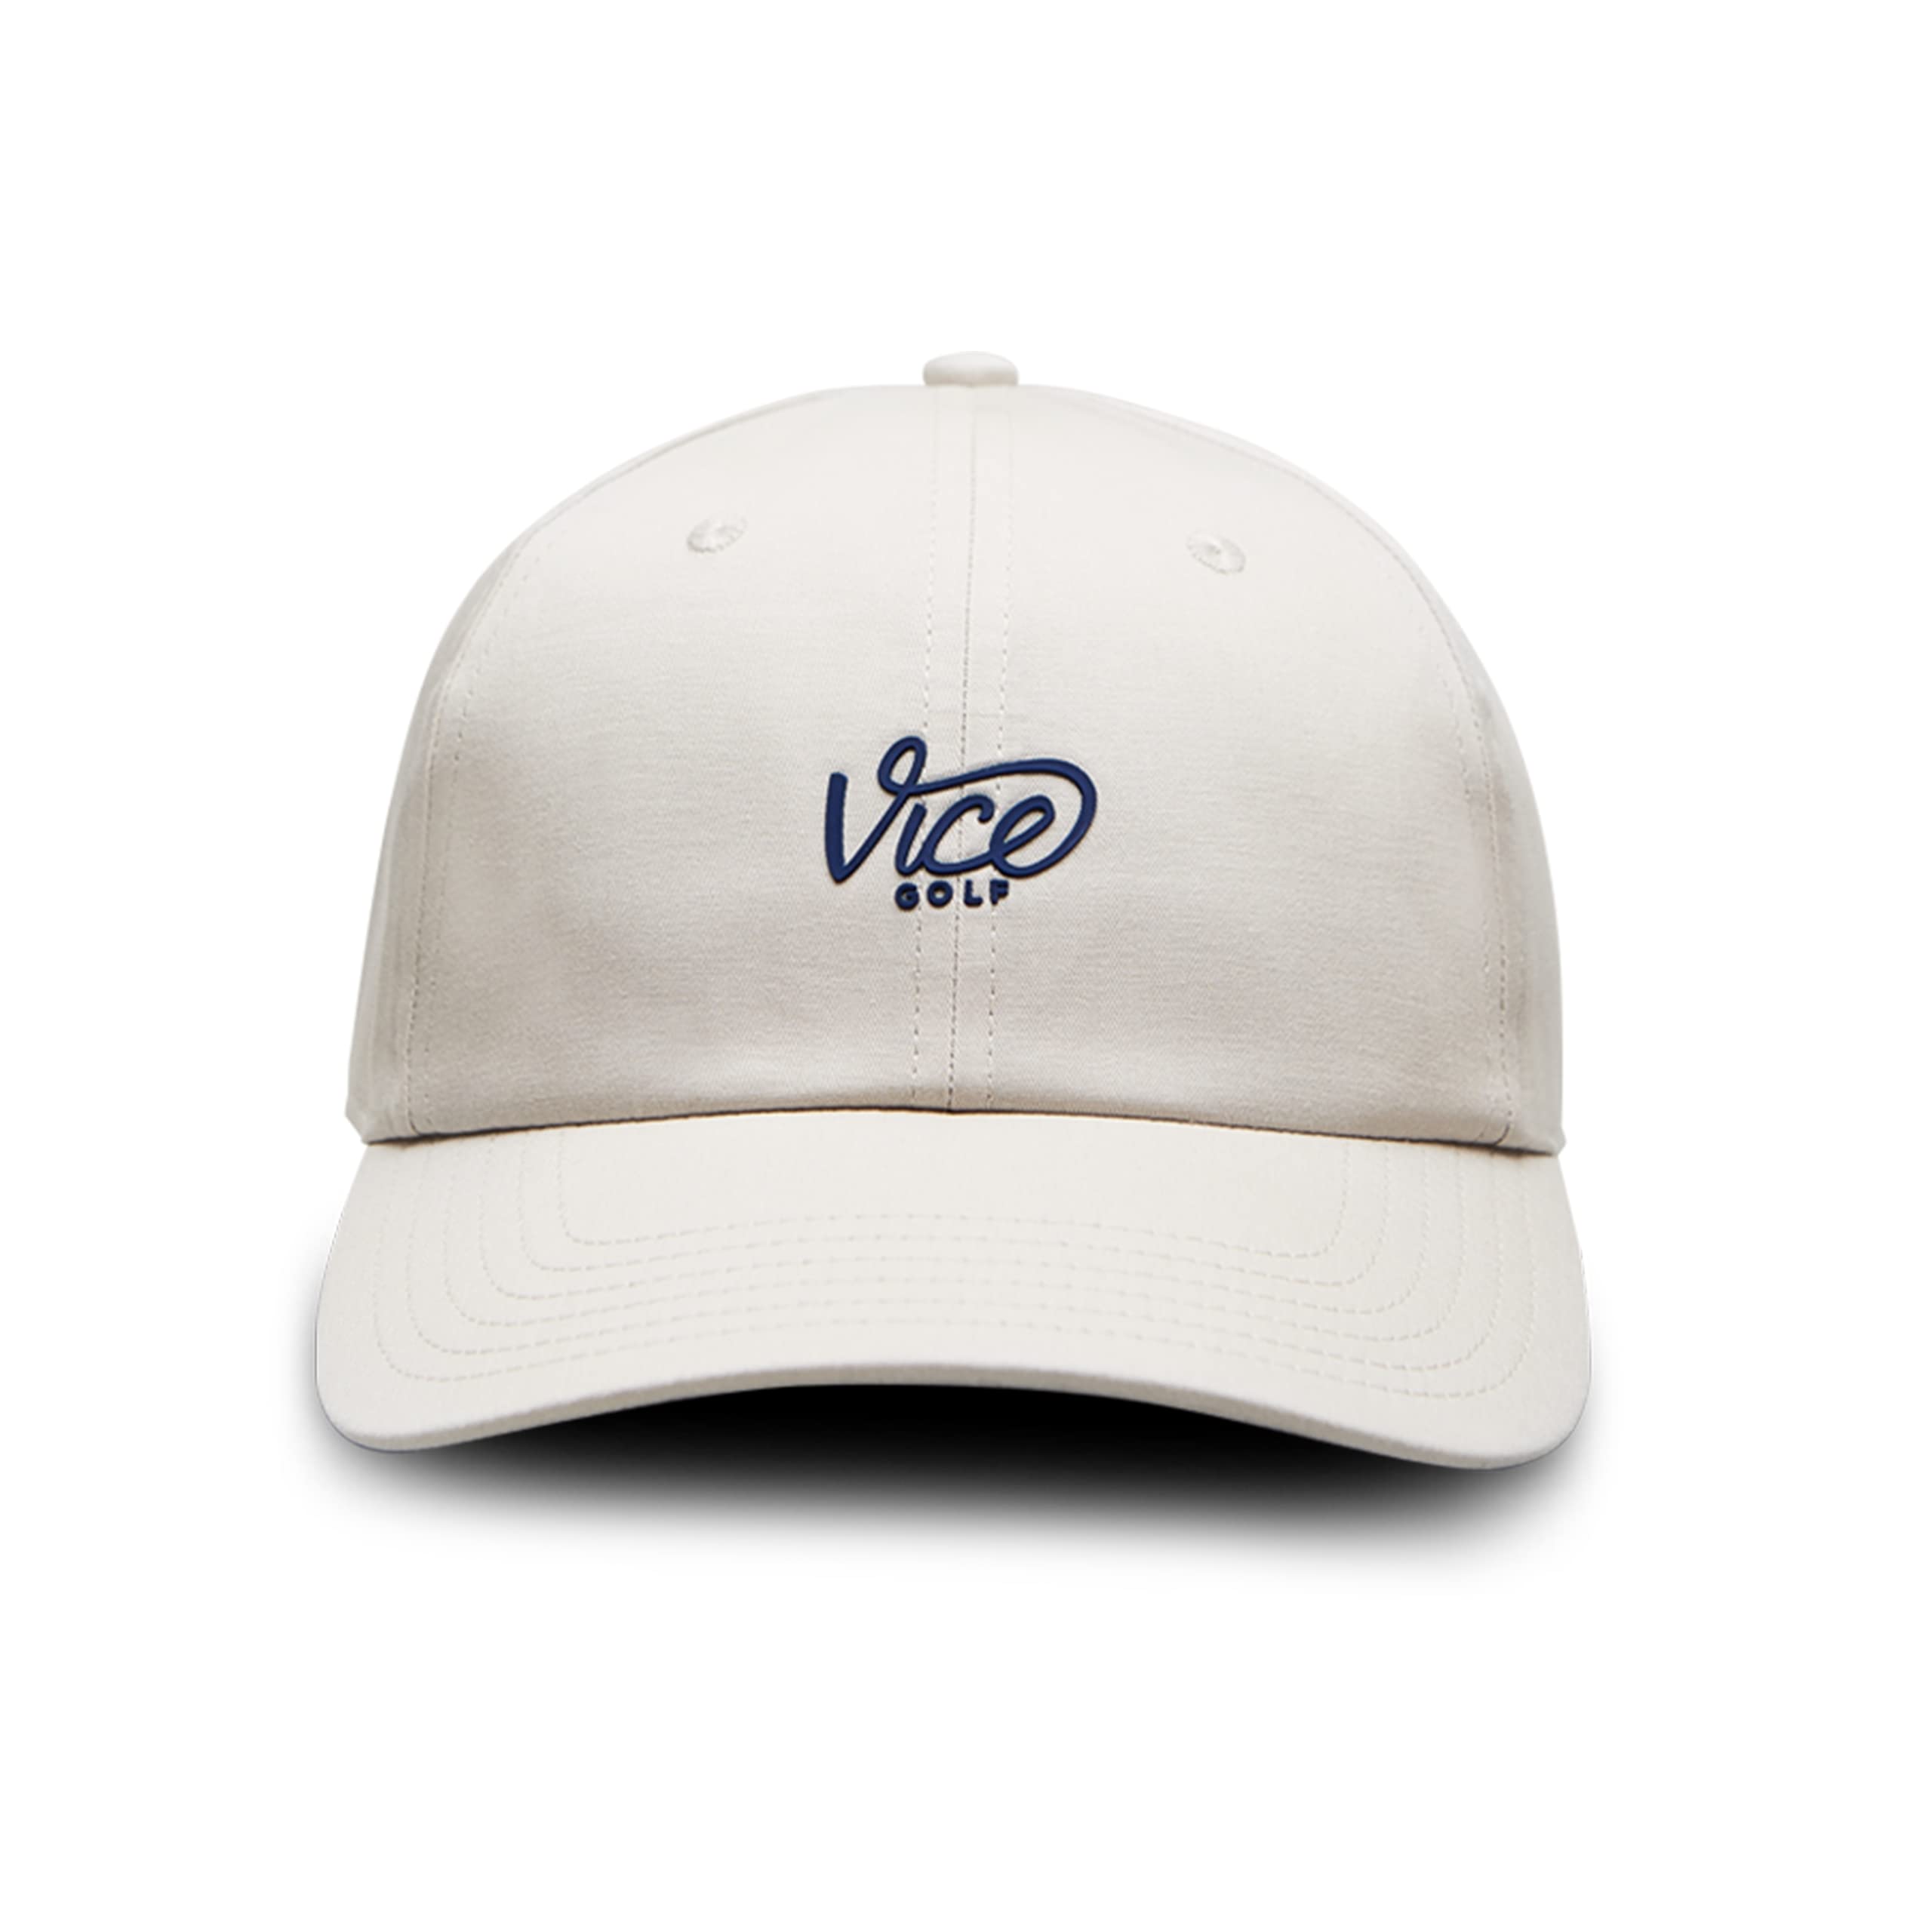 VICE Golf DAD Crew Cap | Multiple Colors | Golf Cap | One Size fits All | Unisex